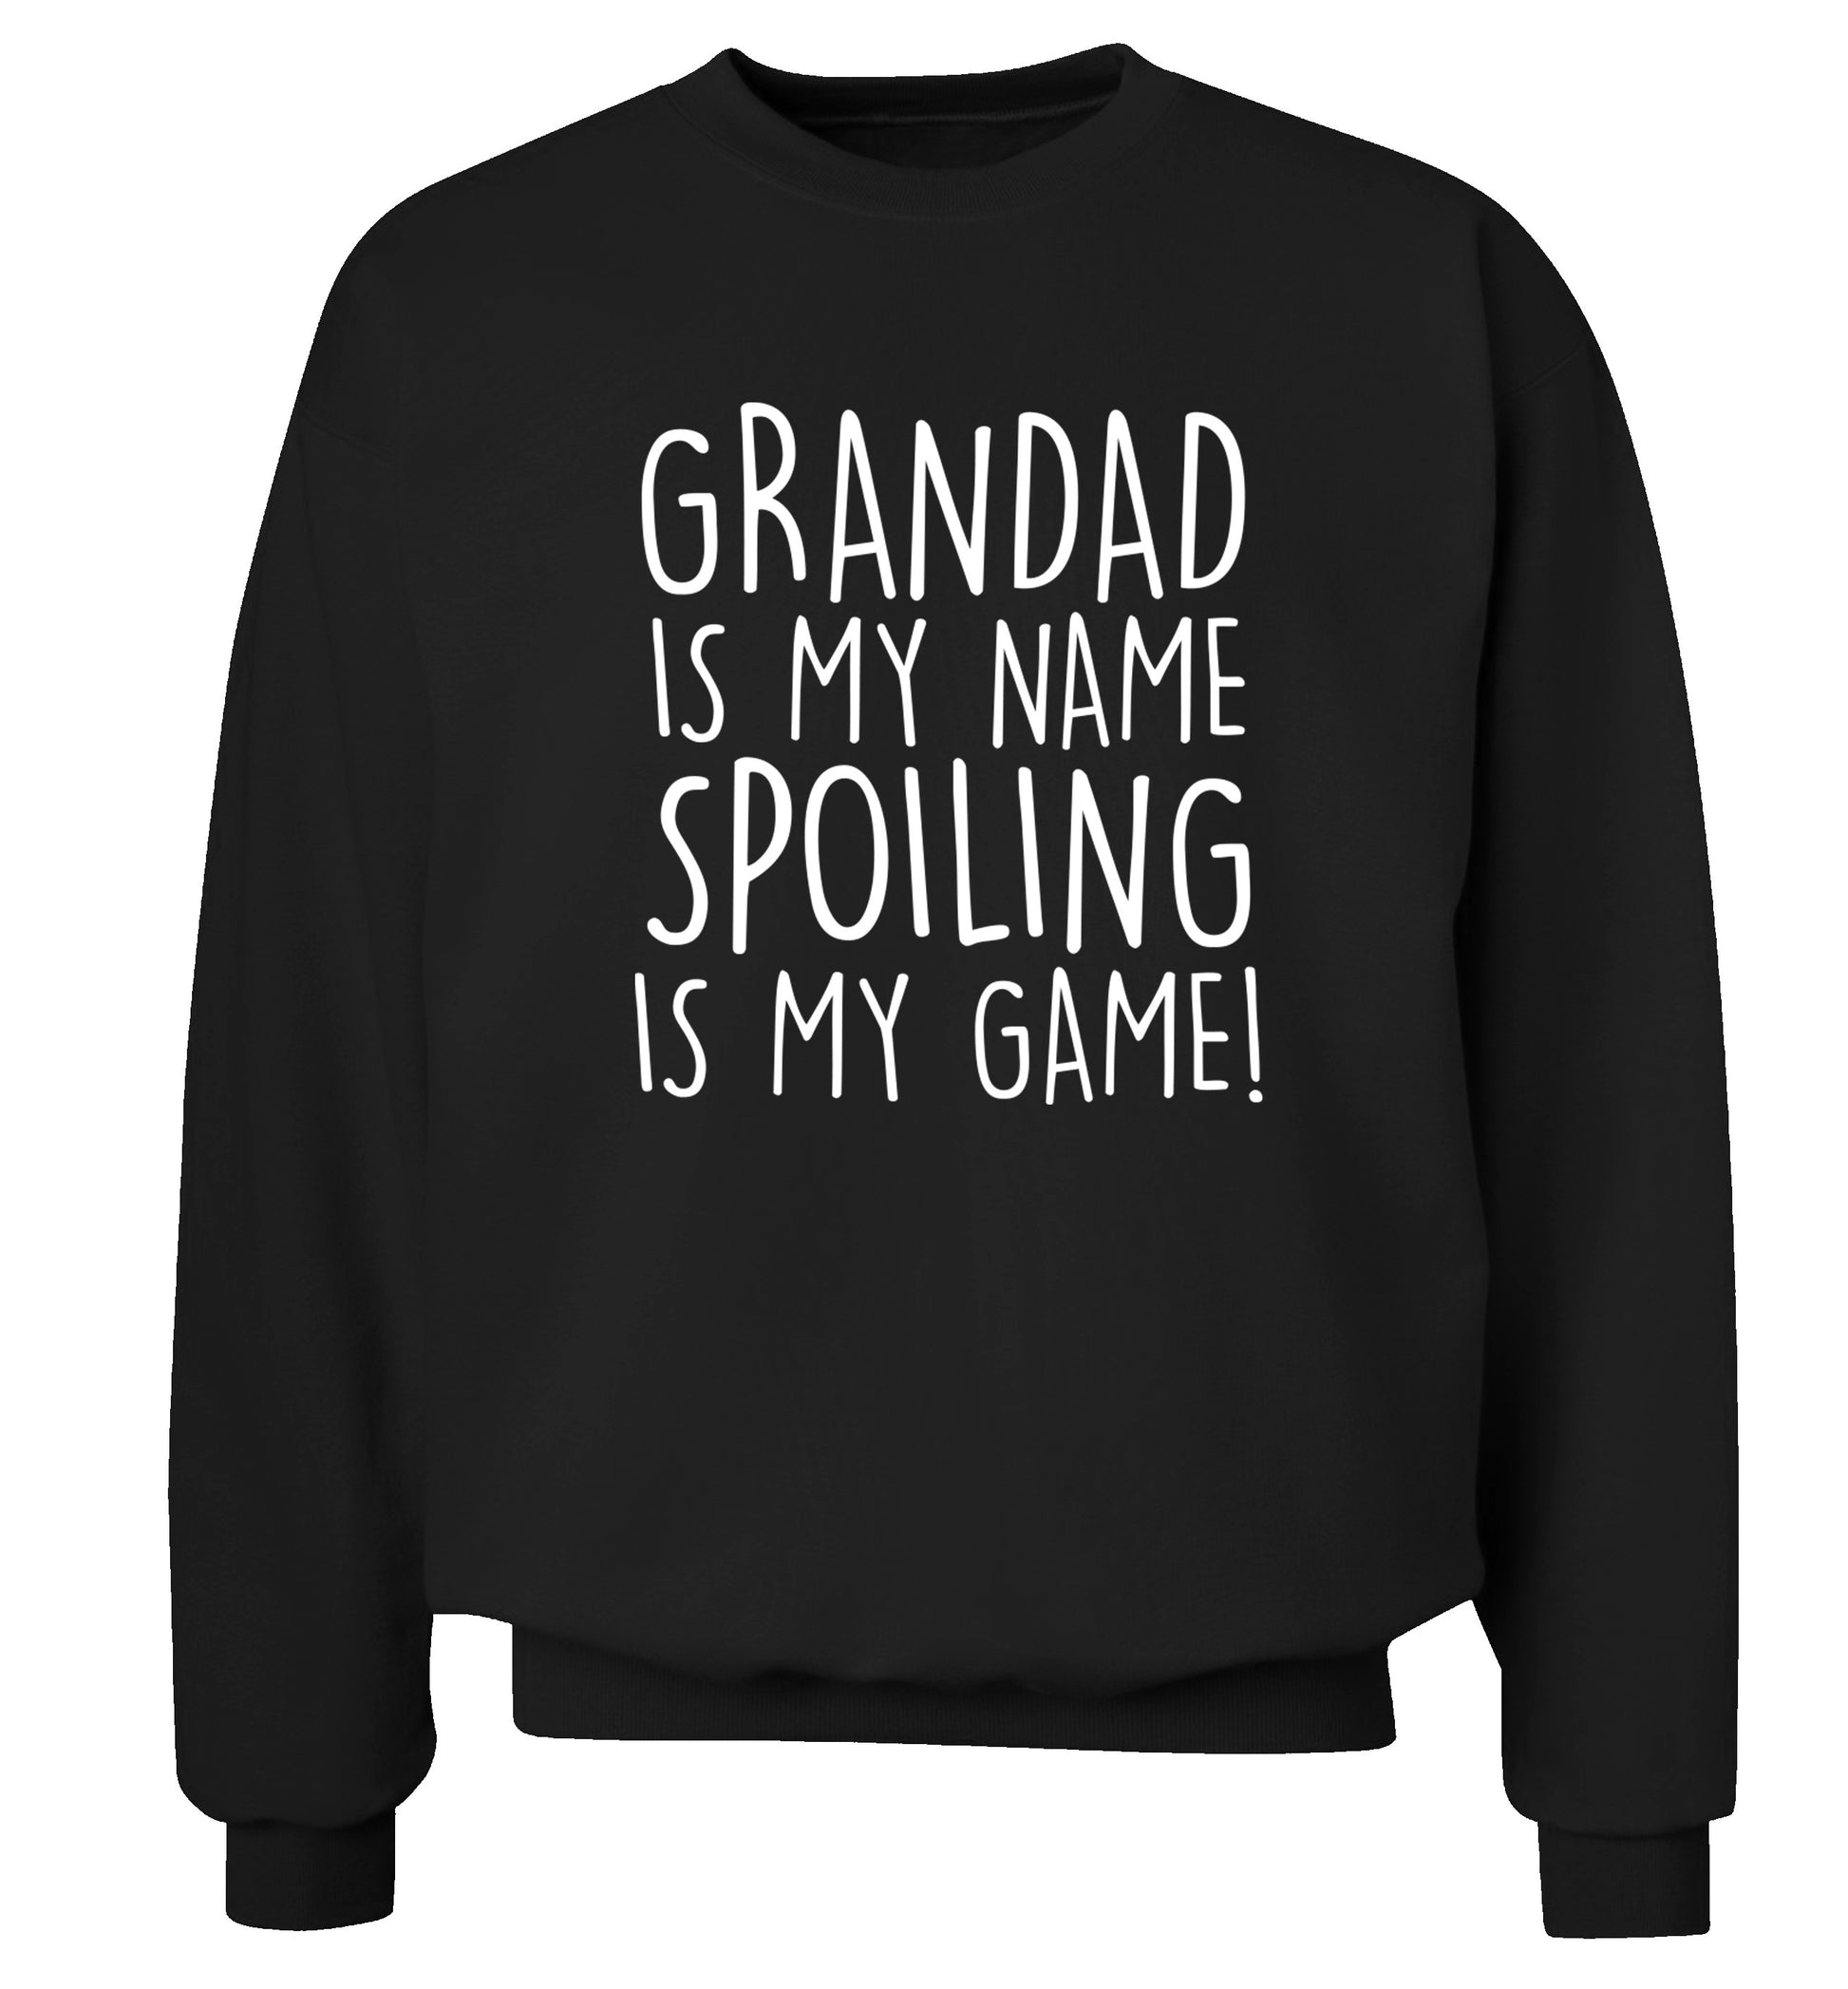 Grandad is my name, spoiling is my game Adult's unisex black Sweater 2XL